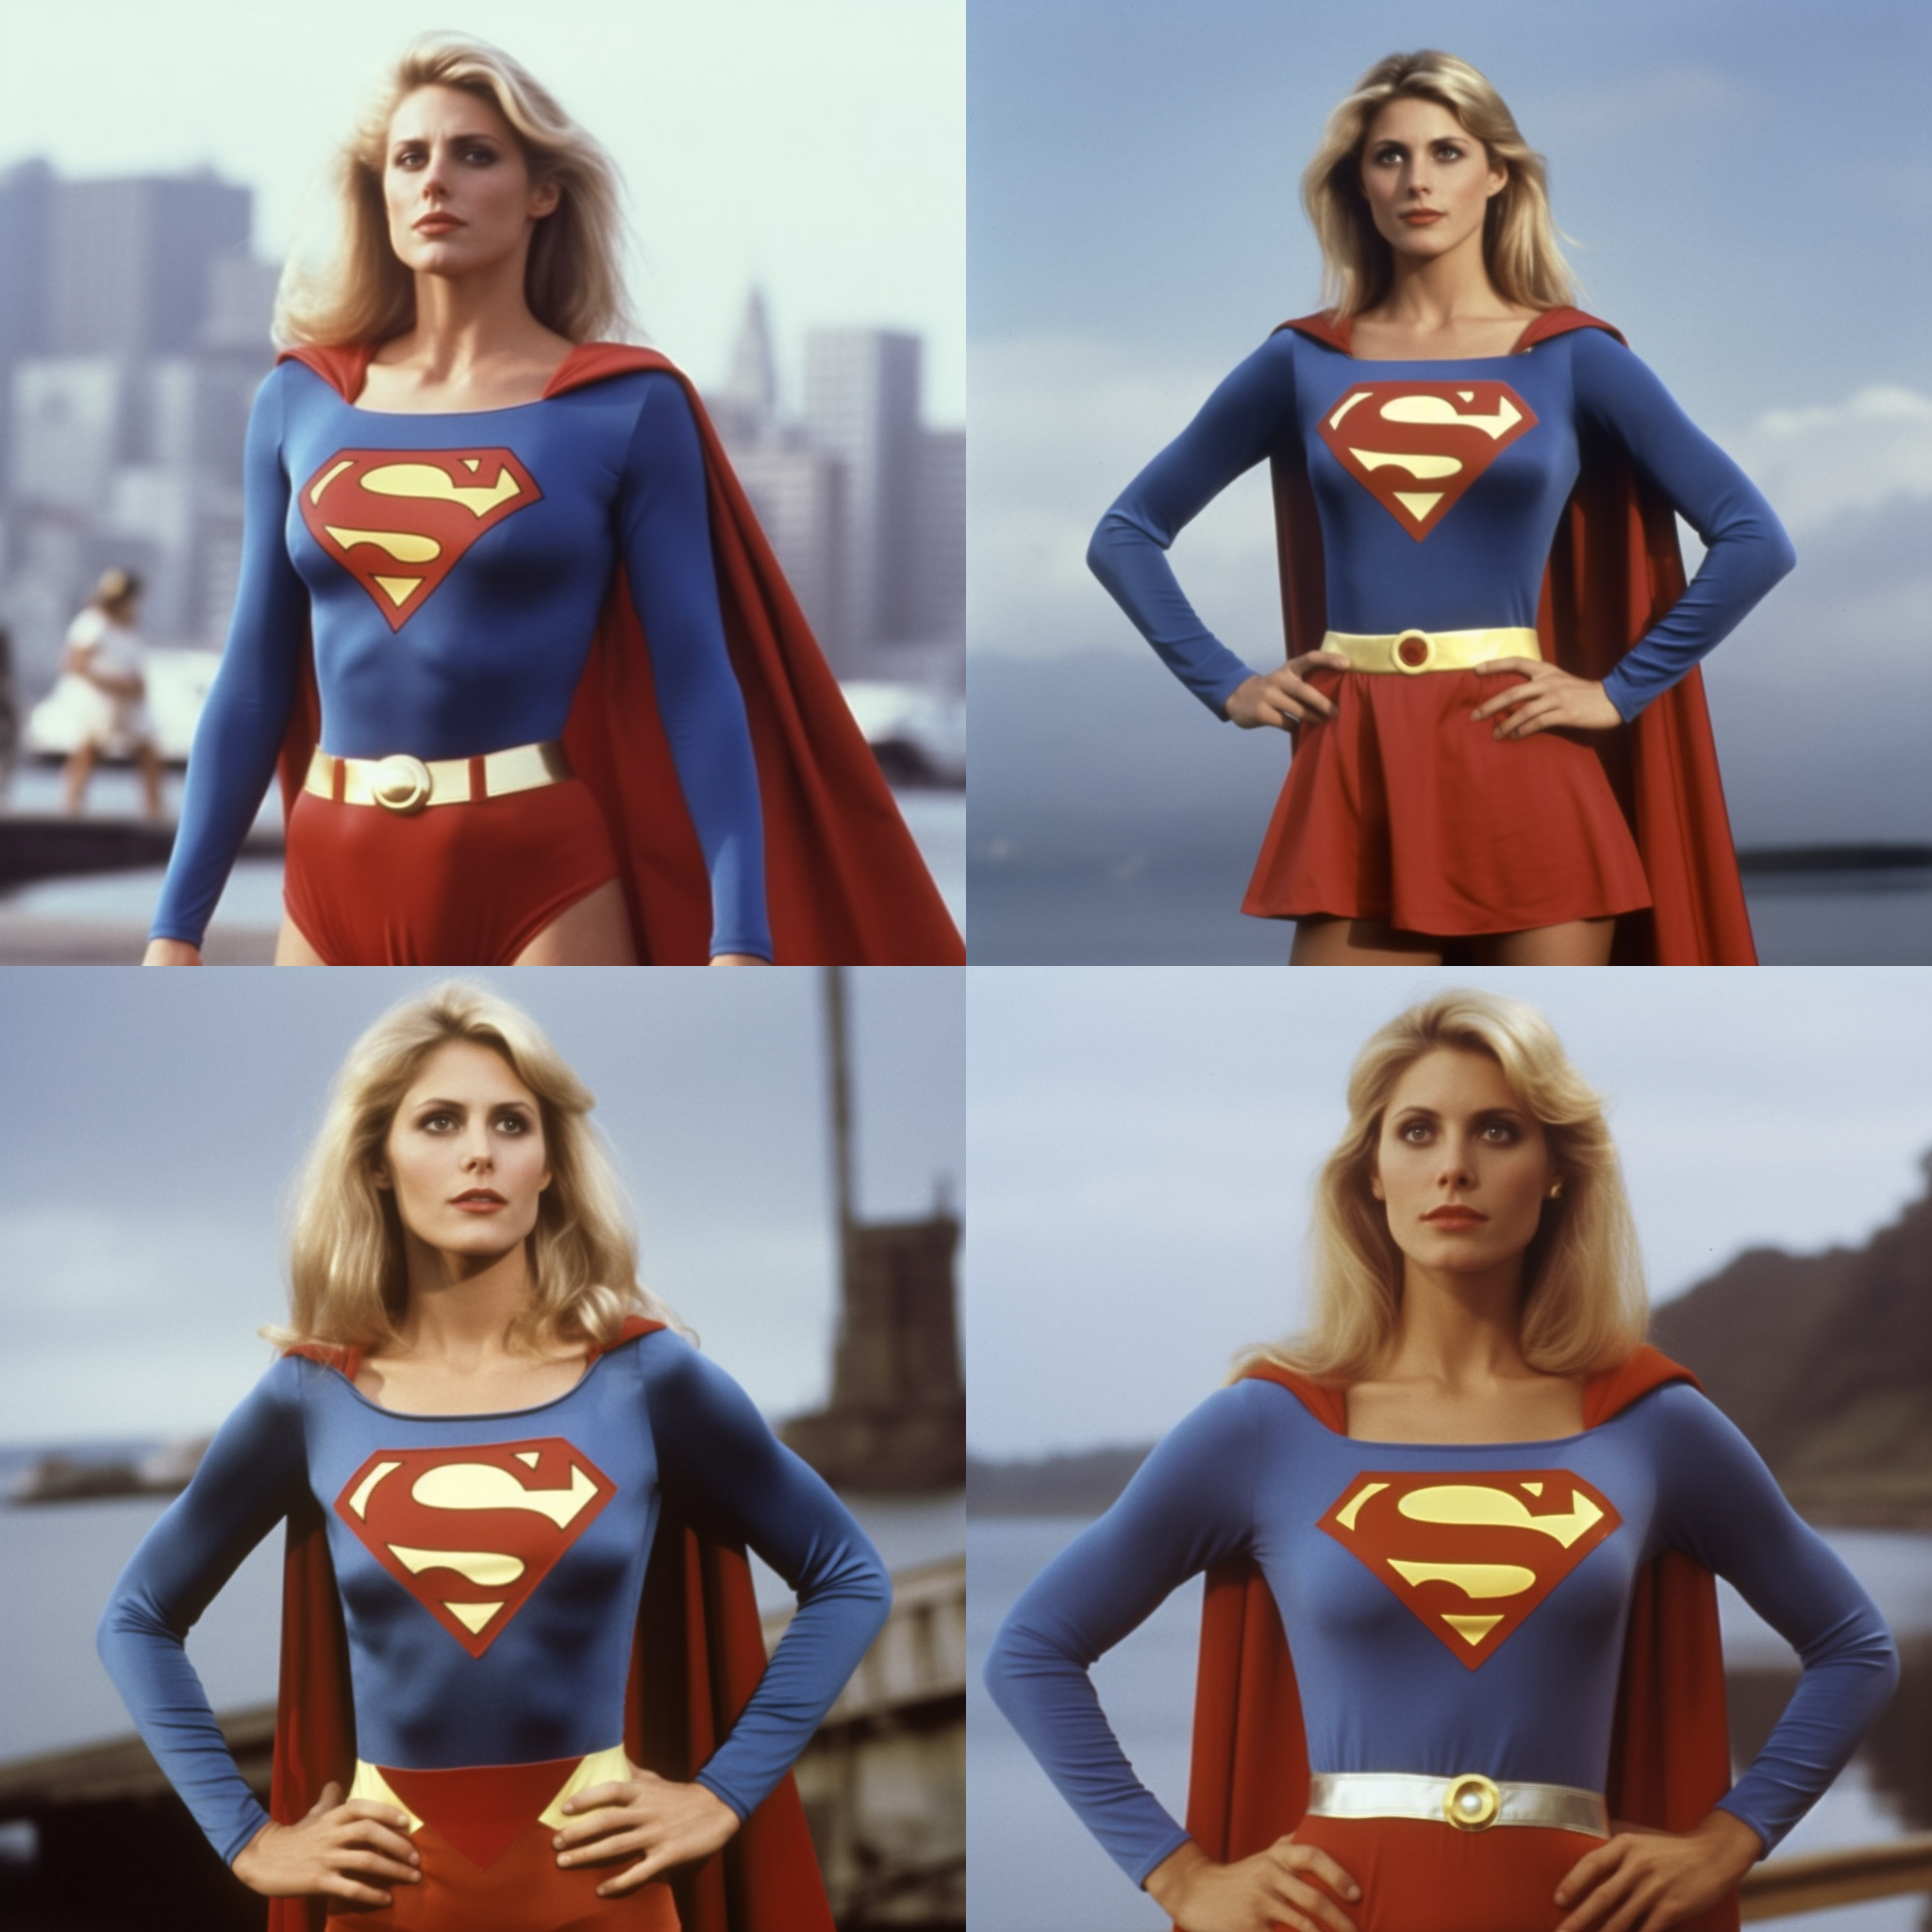 Sir_Frogdick_Supergirl_1984_Helen_Slater_in_the_1980s_dressed_i_03b92e06-609c-48e1-aa5d-e58ff1603d7c.png